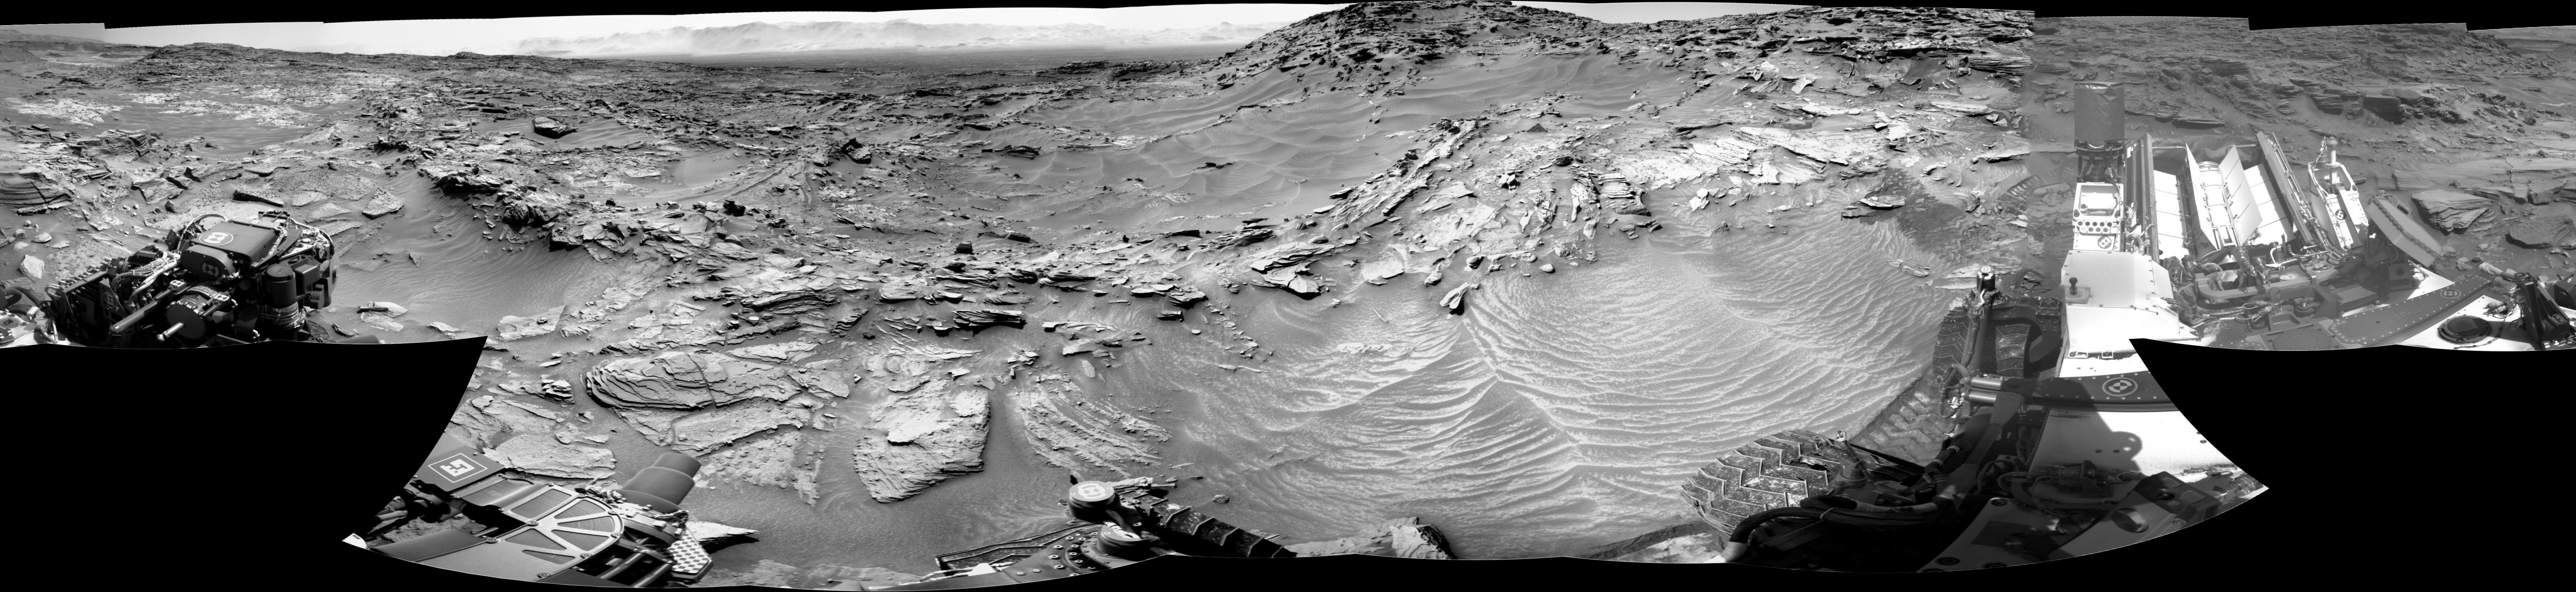 panoramic curiosity rover view b&w 1 - sol 1346 - was life on mars